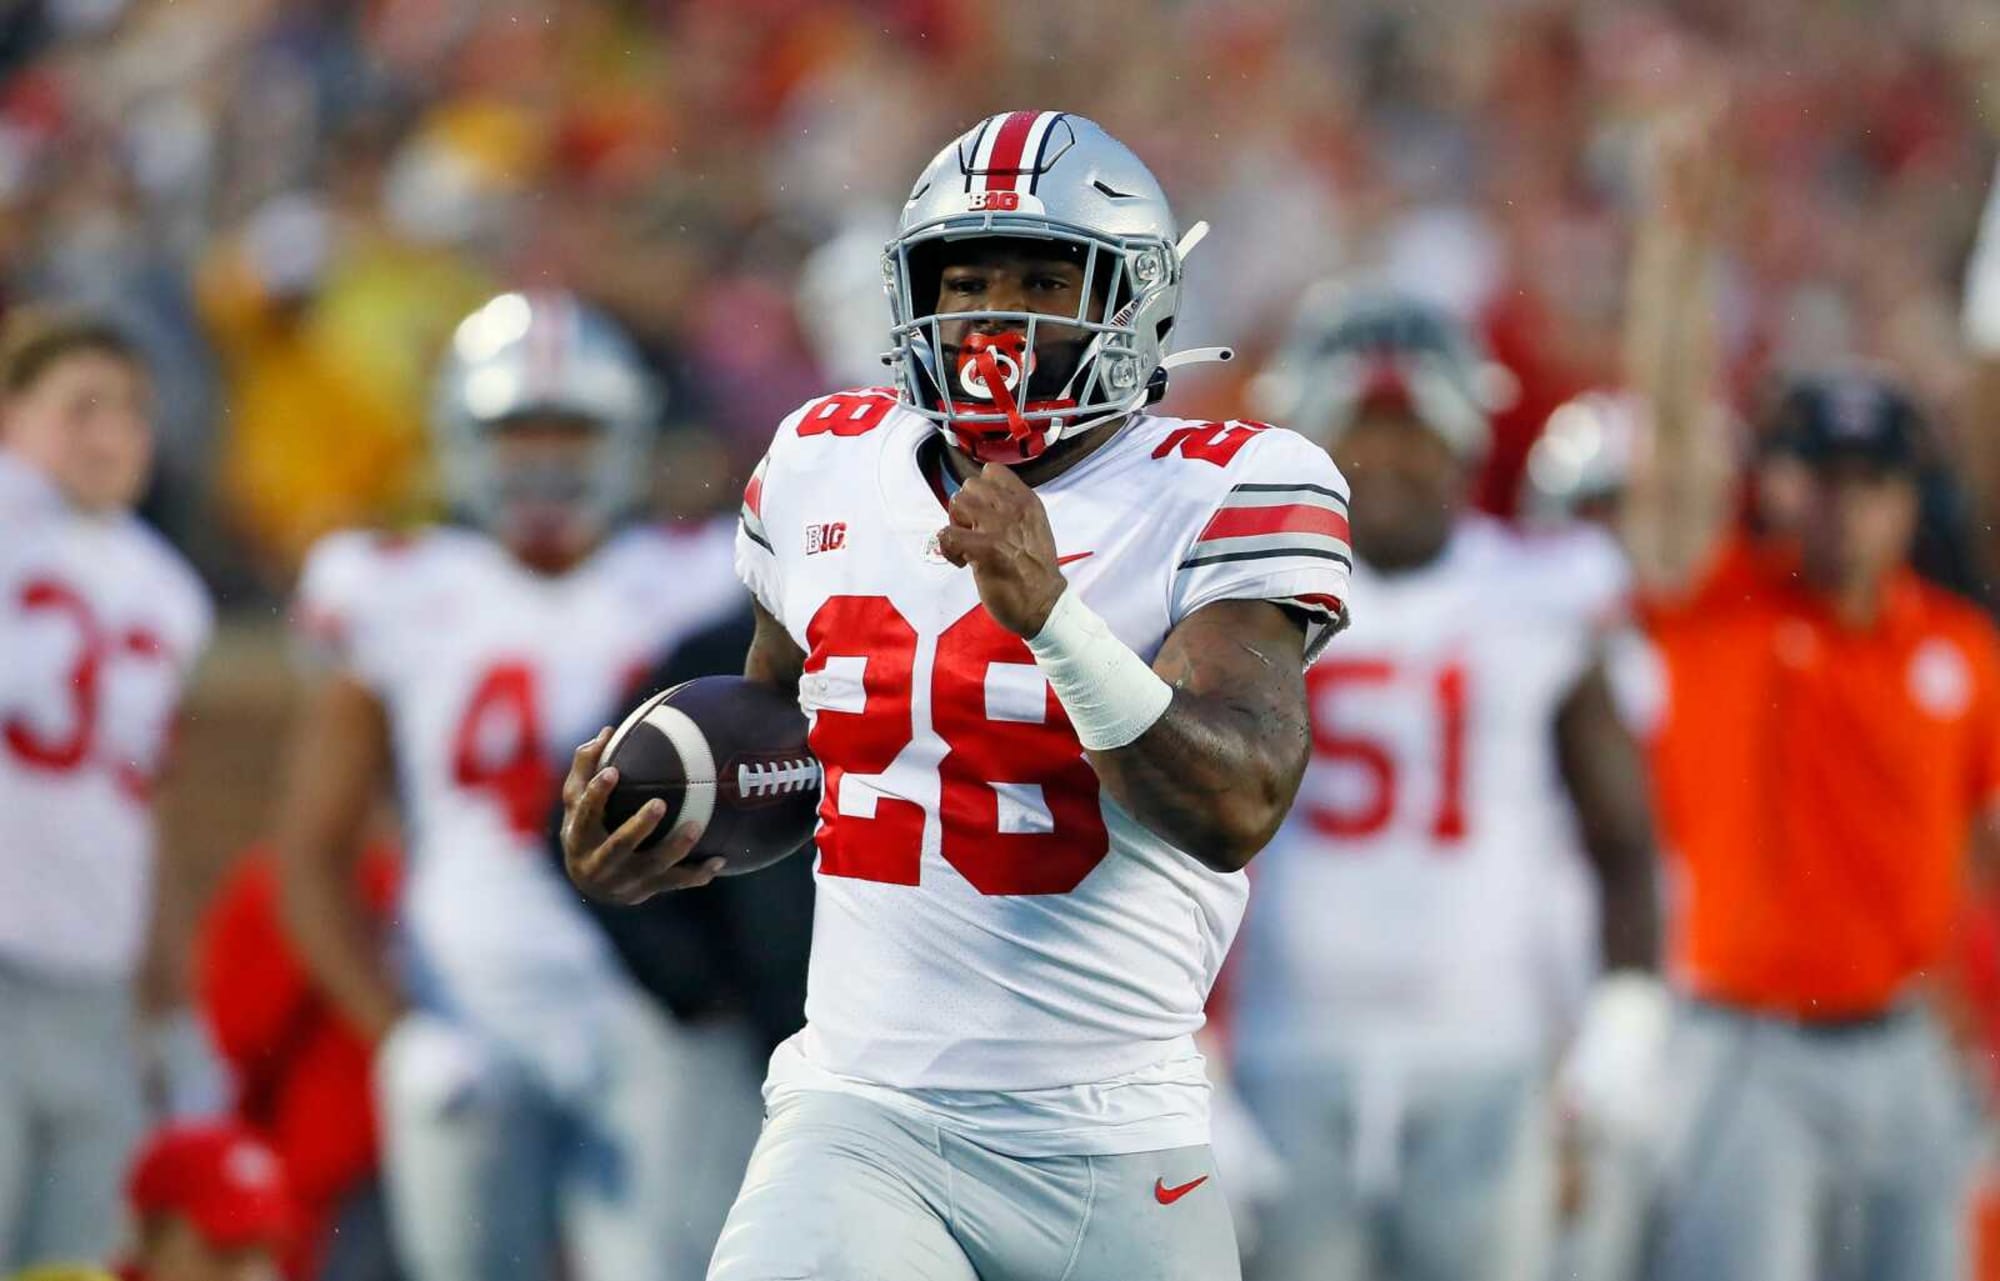 Ohio State running back Miyan Williams of Winton Woods ready to roll